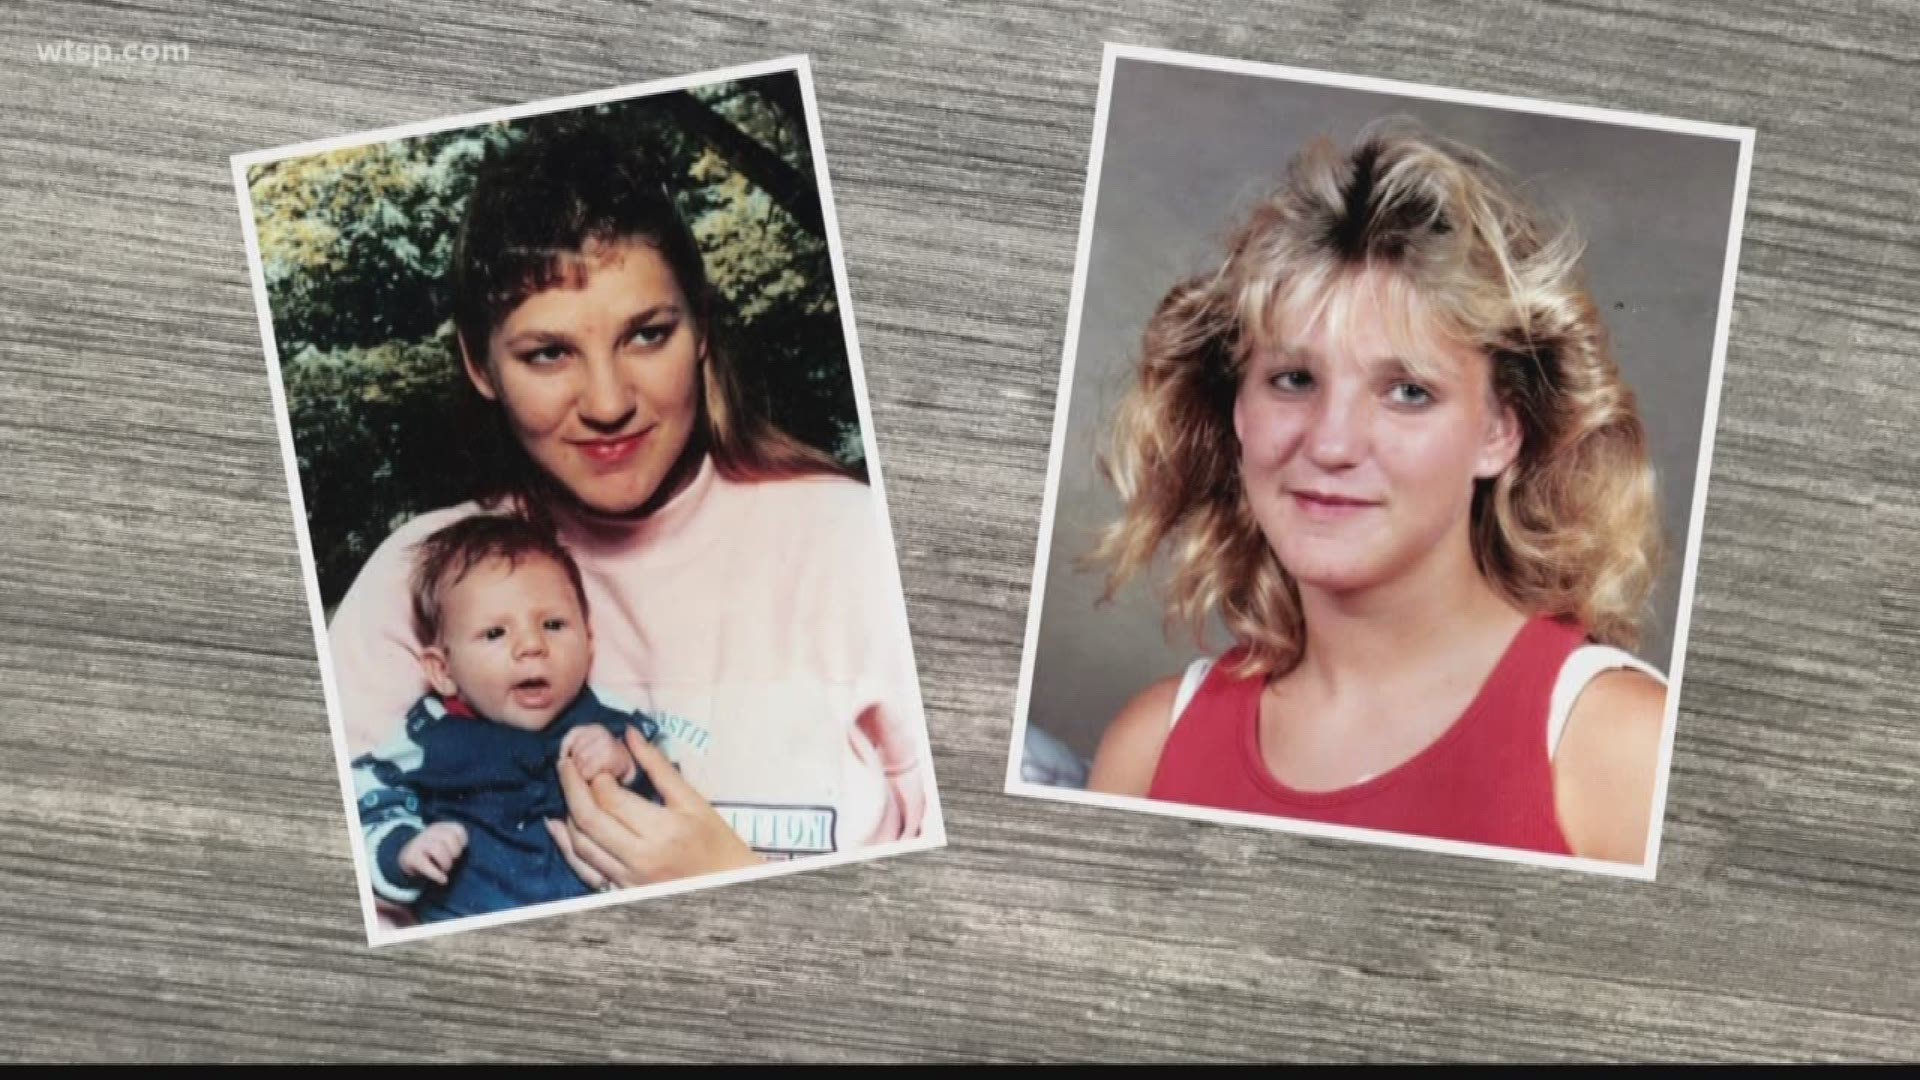 Bonnie and Jeremy Dages have not been seen since a trip to a Brandon Kash n' Karry store in 1993. https://bit.ly/2CW7Nc4